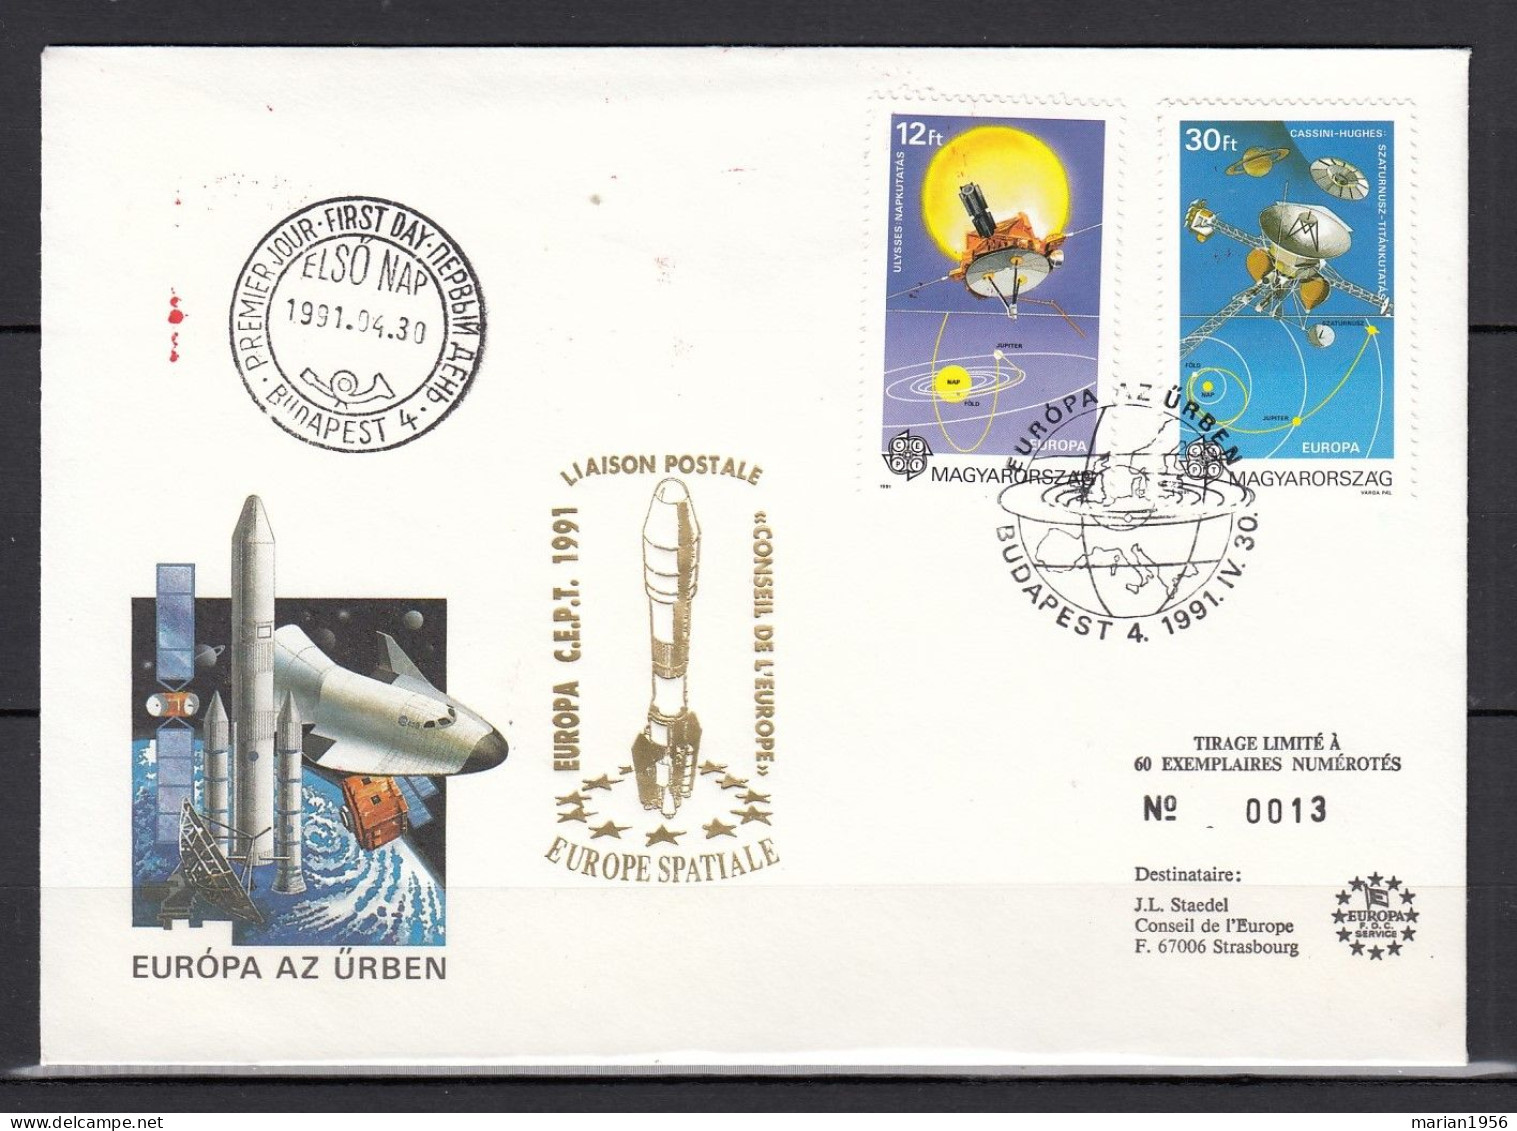 Hongrie 1991 - FDC Special - EUROPA CEPT - Europe Spatiale - Tirage Limite A 60 Ex.numerotes - 1991